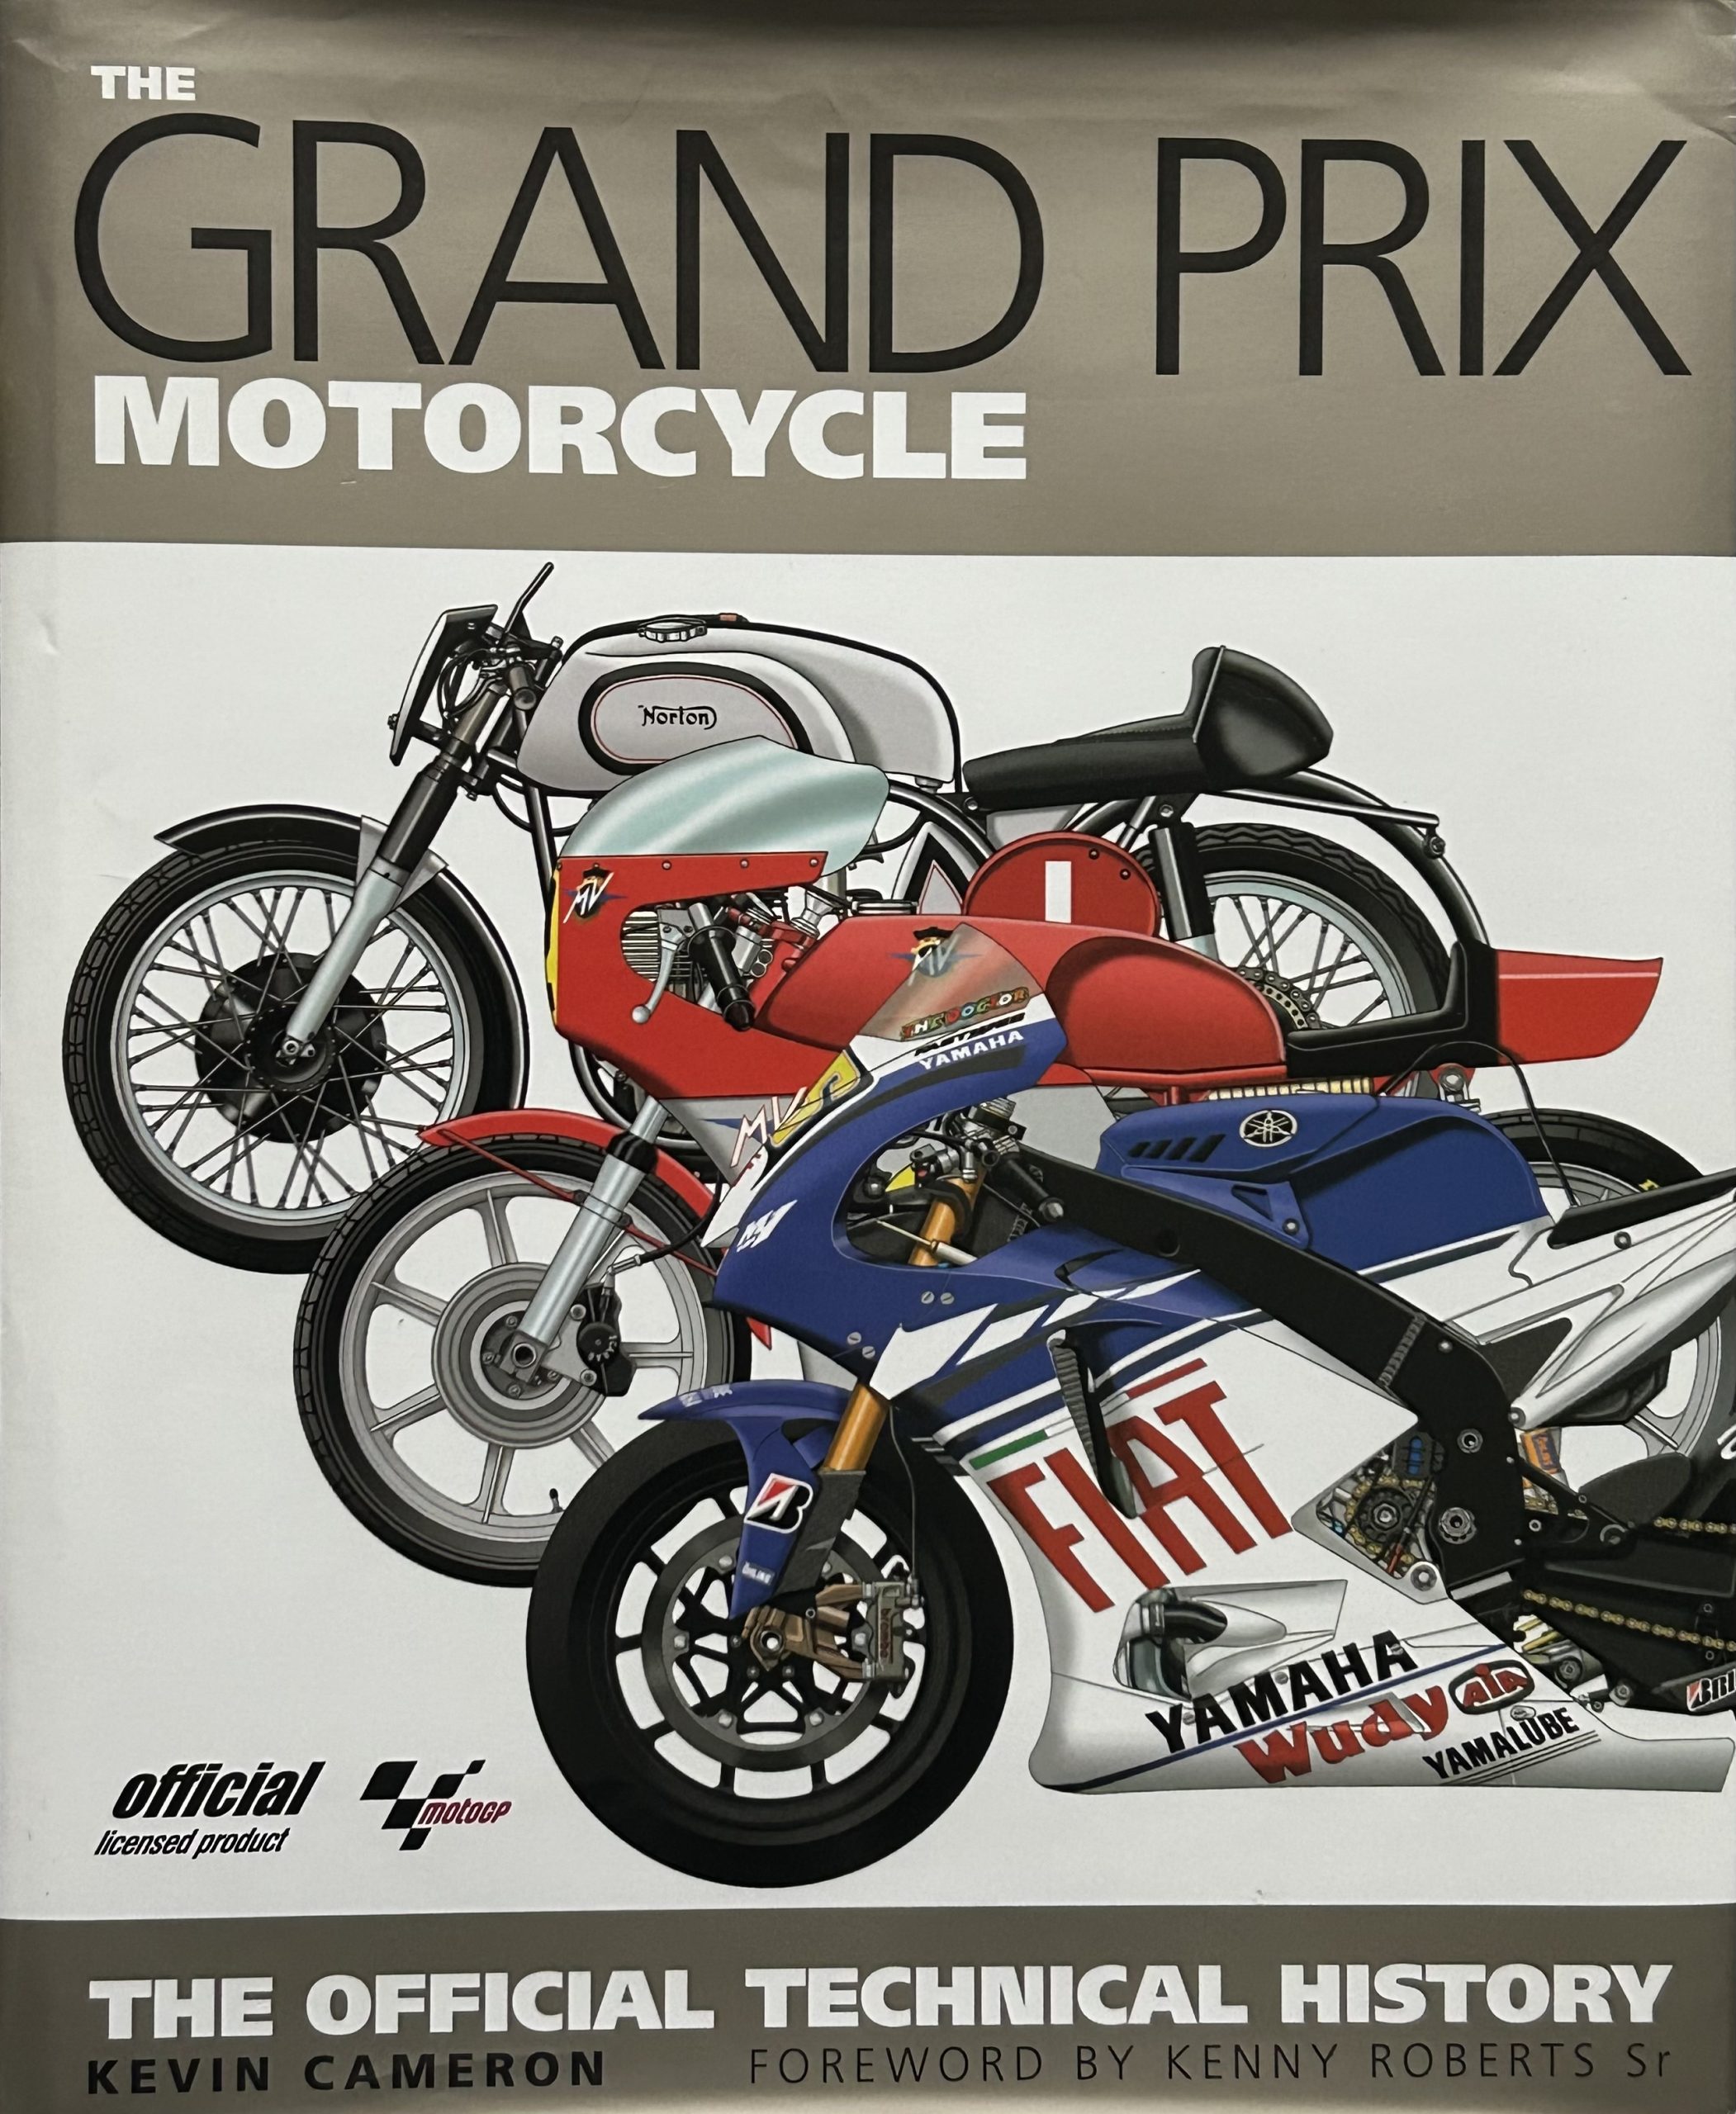 The Grand Prix Motorcycle: The Official Technical History by Kevin Cameron